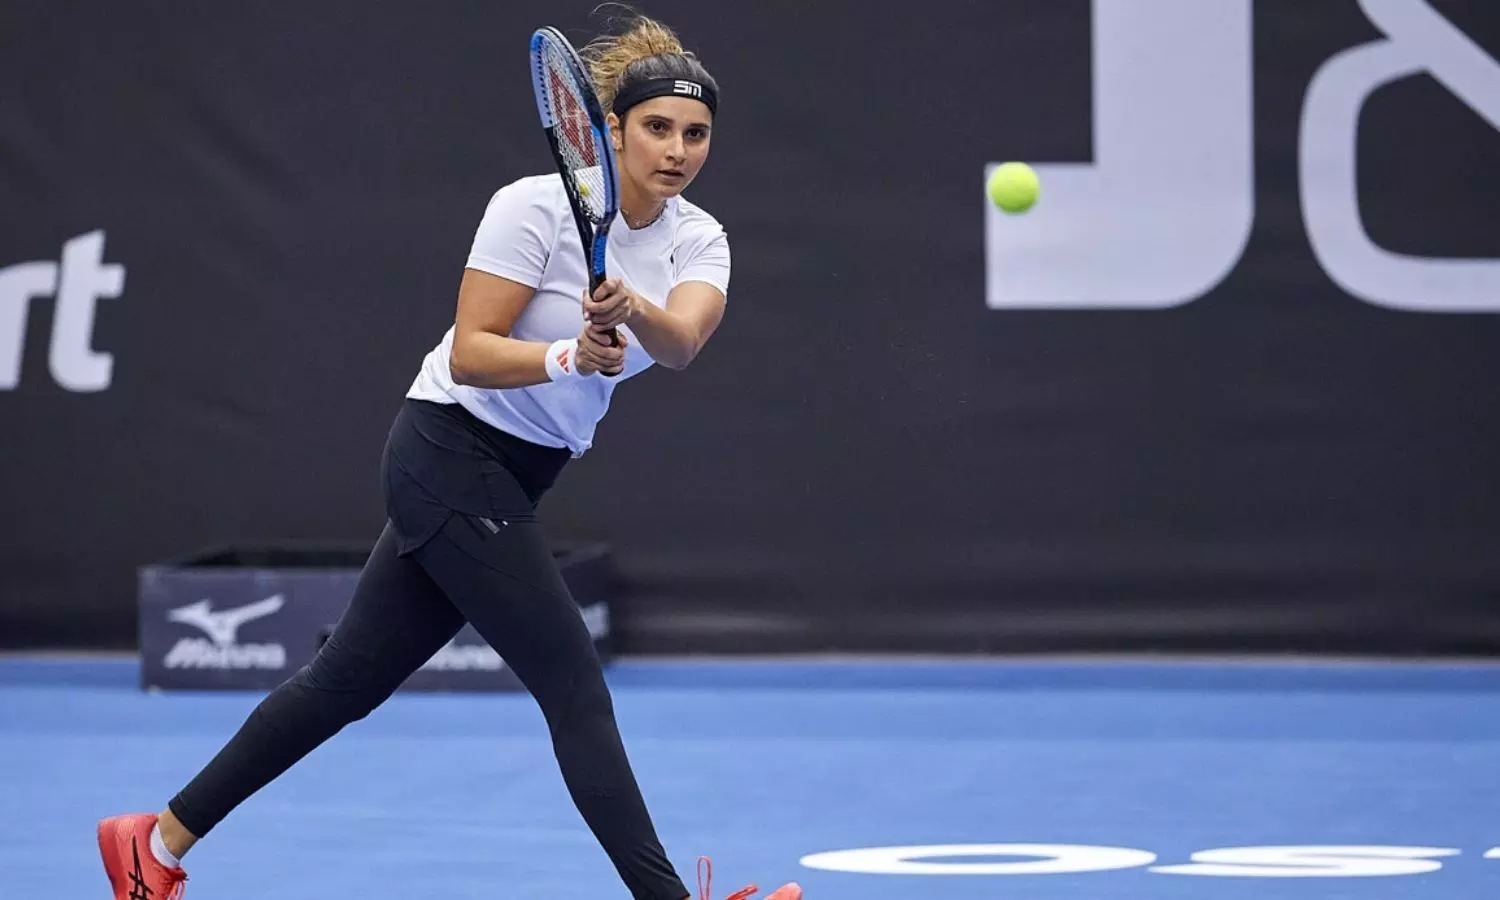 I've decided this will be my final season' - Sania Mirza after Australian  Open loss